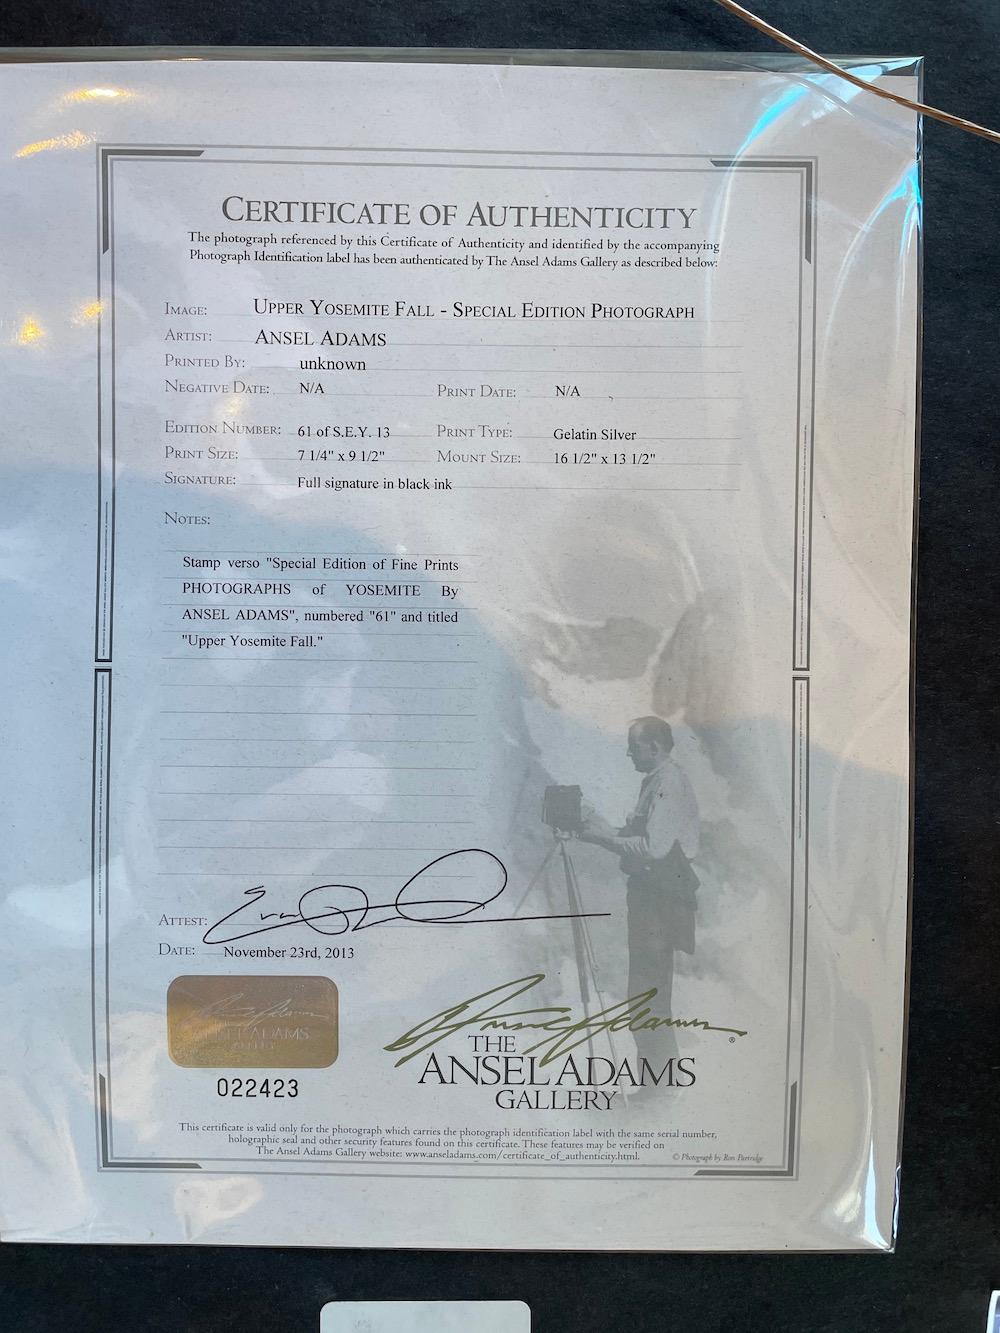 Your chance to own an original Ansel Adams photograph. Signed in pen. Special Edition print printed by someone else. Authorized by the Ansel Adams gallery accompanied with Certificate of Authenticity.
